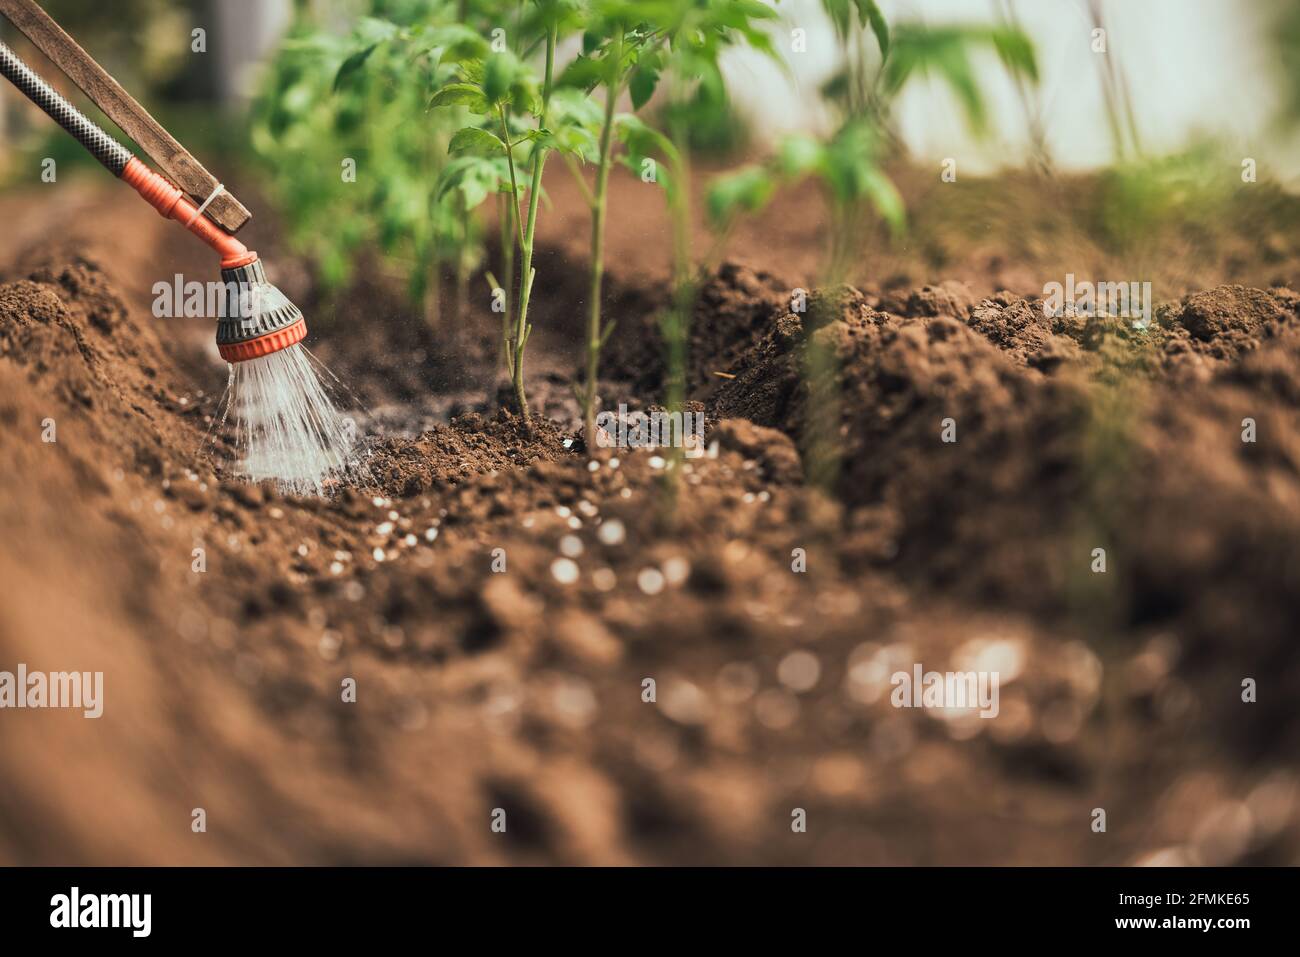 Farmer watering tomato plant in greenhouse, homegrown organic vegetables. Stock Photo